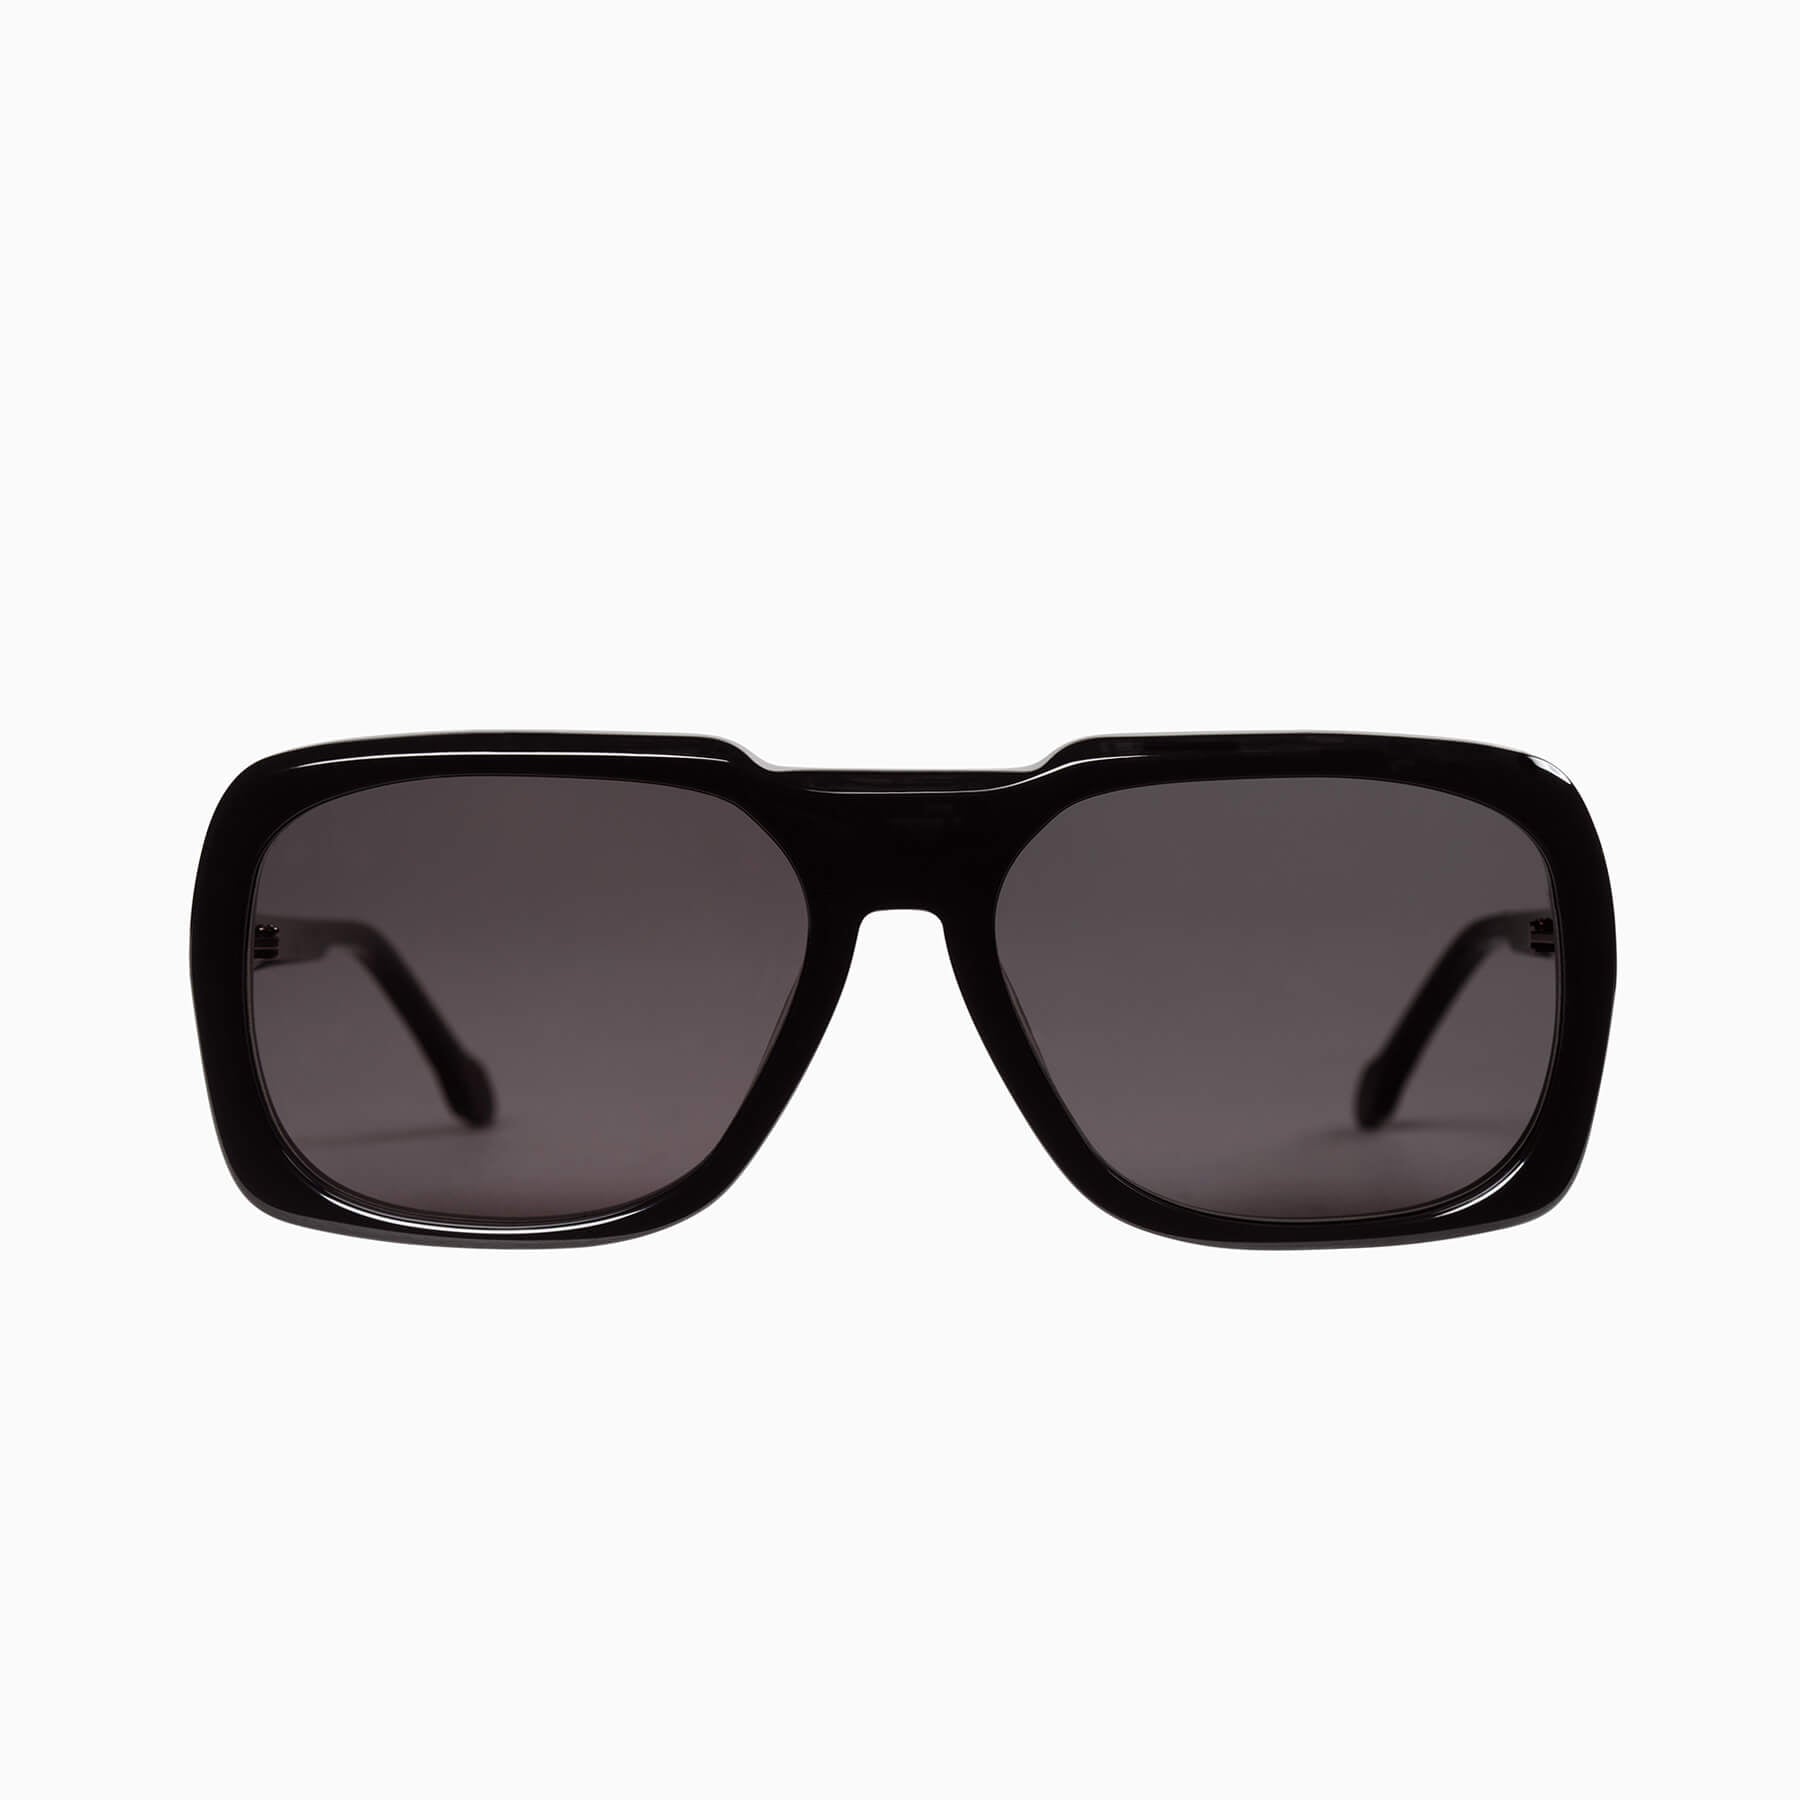 Oversized Square Large Sunglasses For Women Top Brand Eyewear For Travel  And Shades From Granthill, $18.58